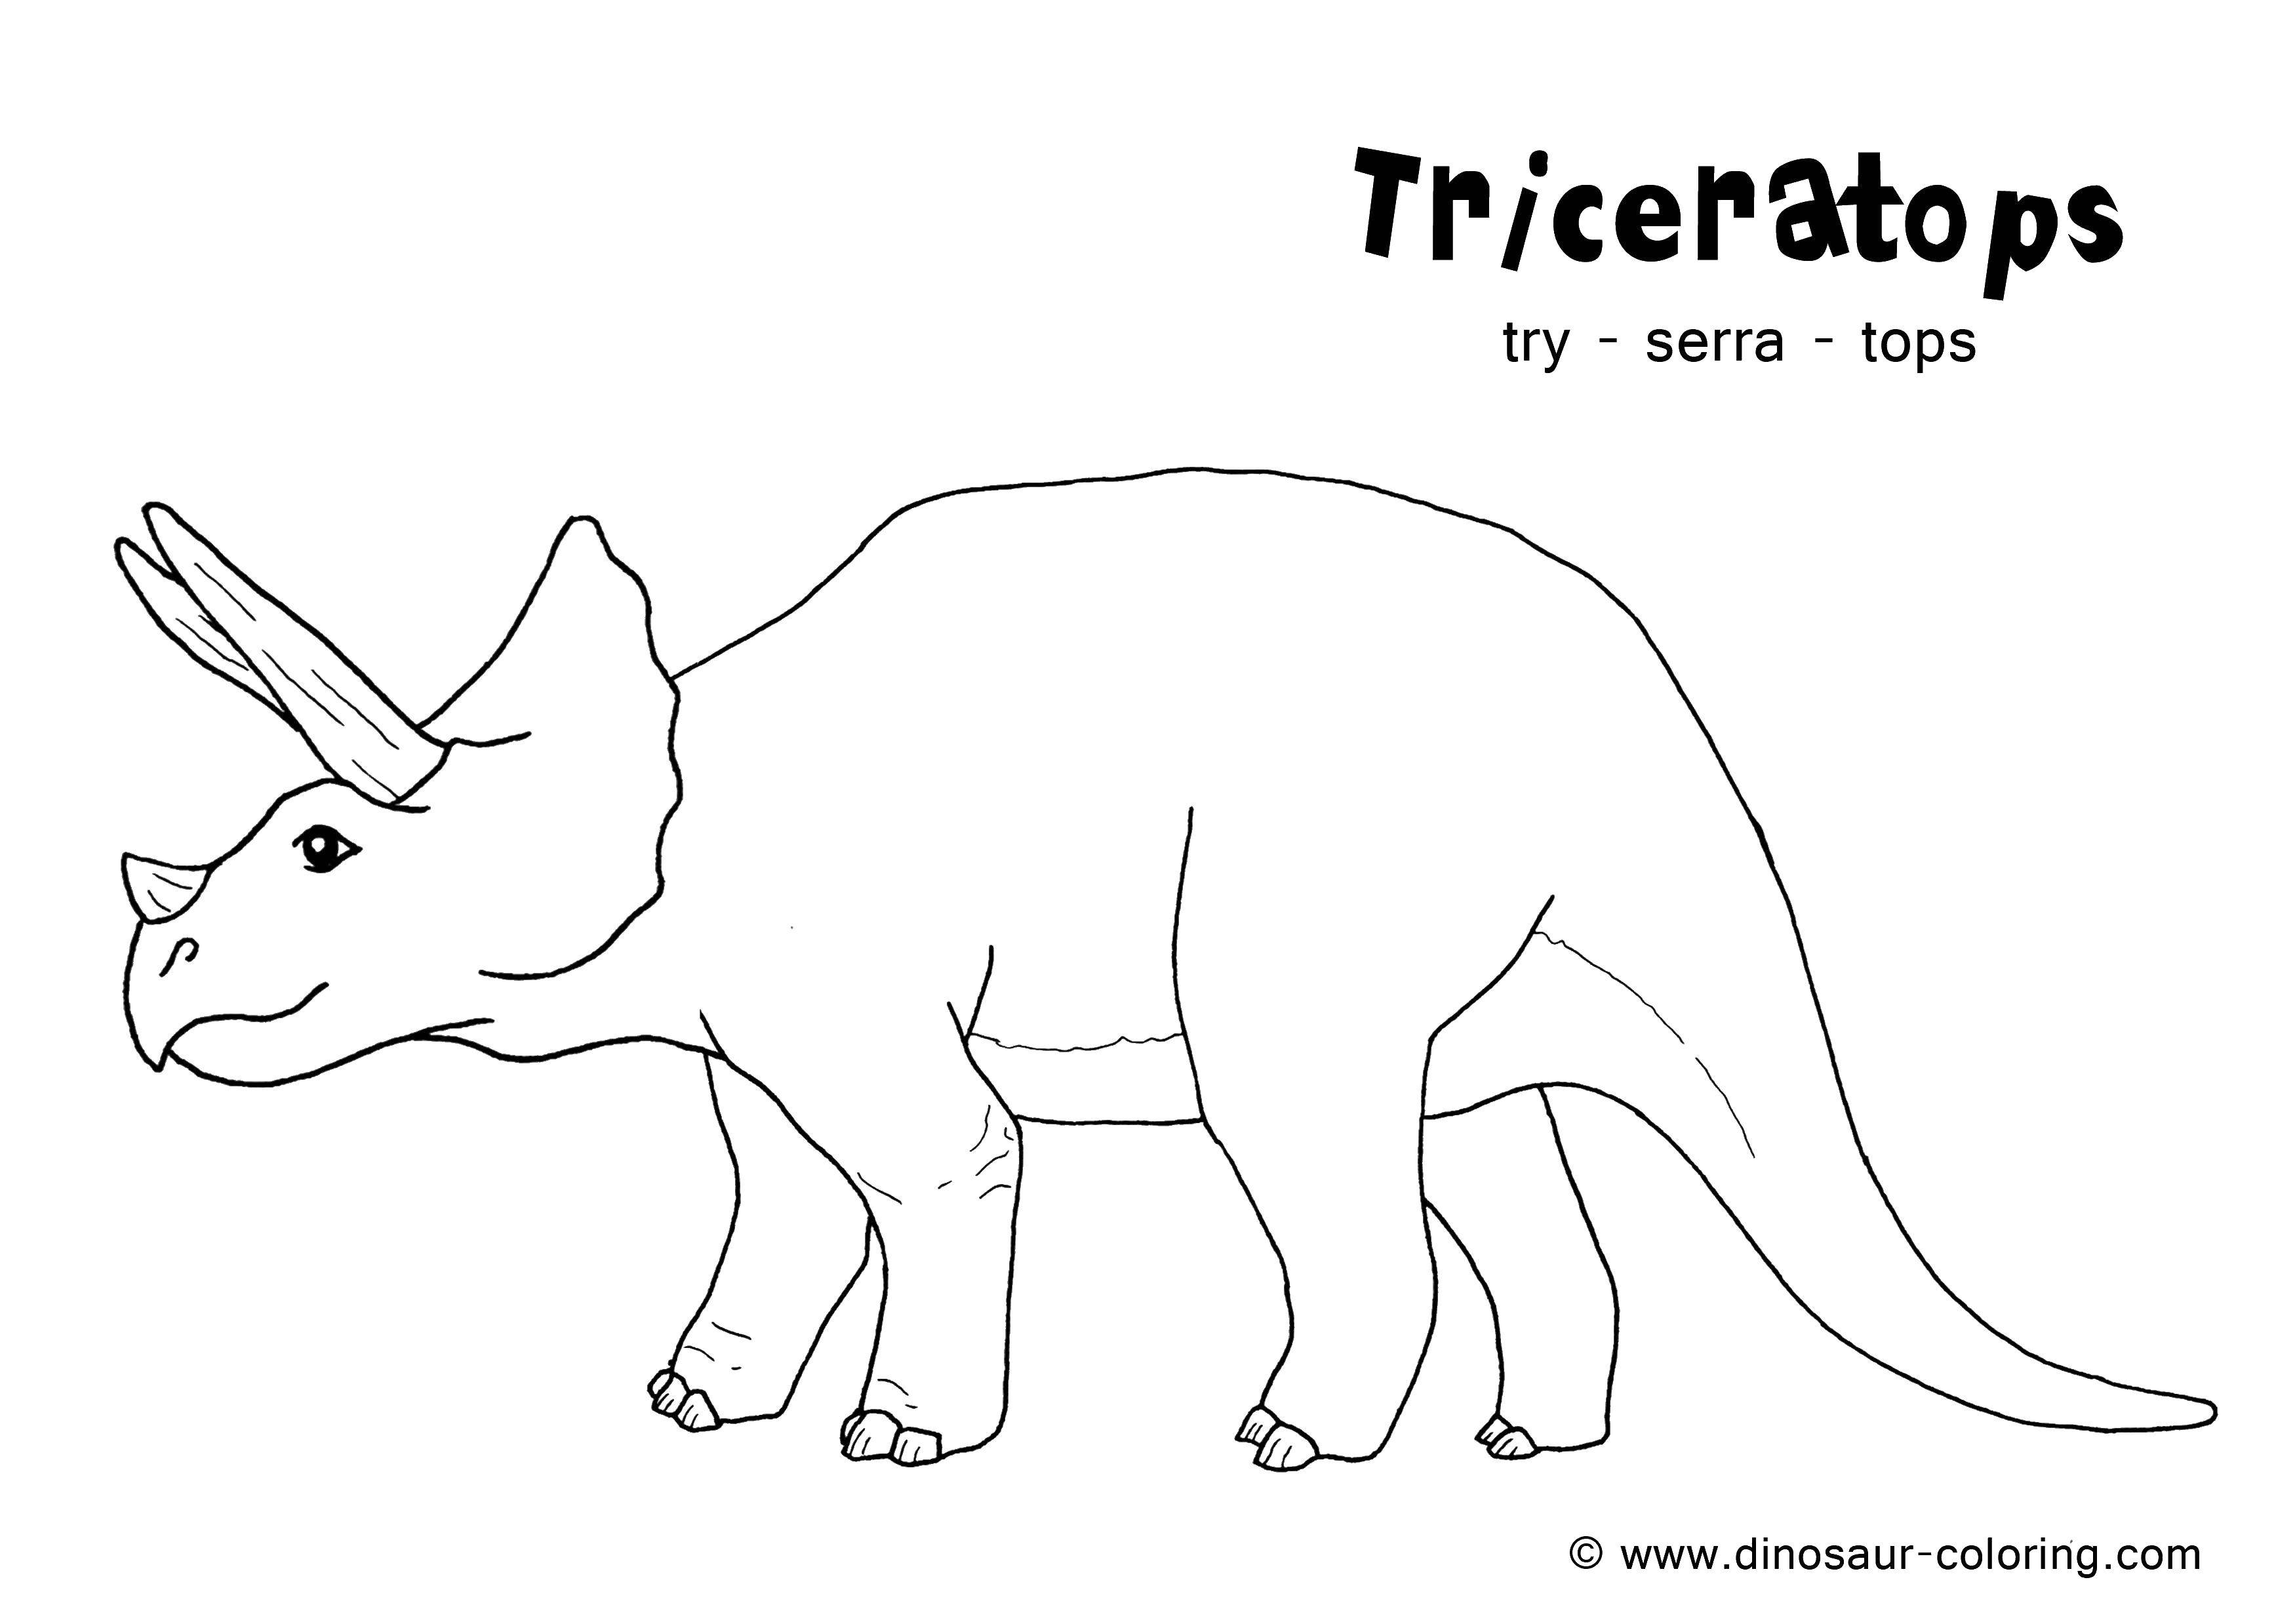 Coloring Triceratops.. Category Jurassic Park. Tags:  Jurassic Park, Triceratops.